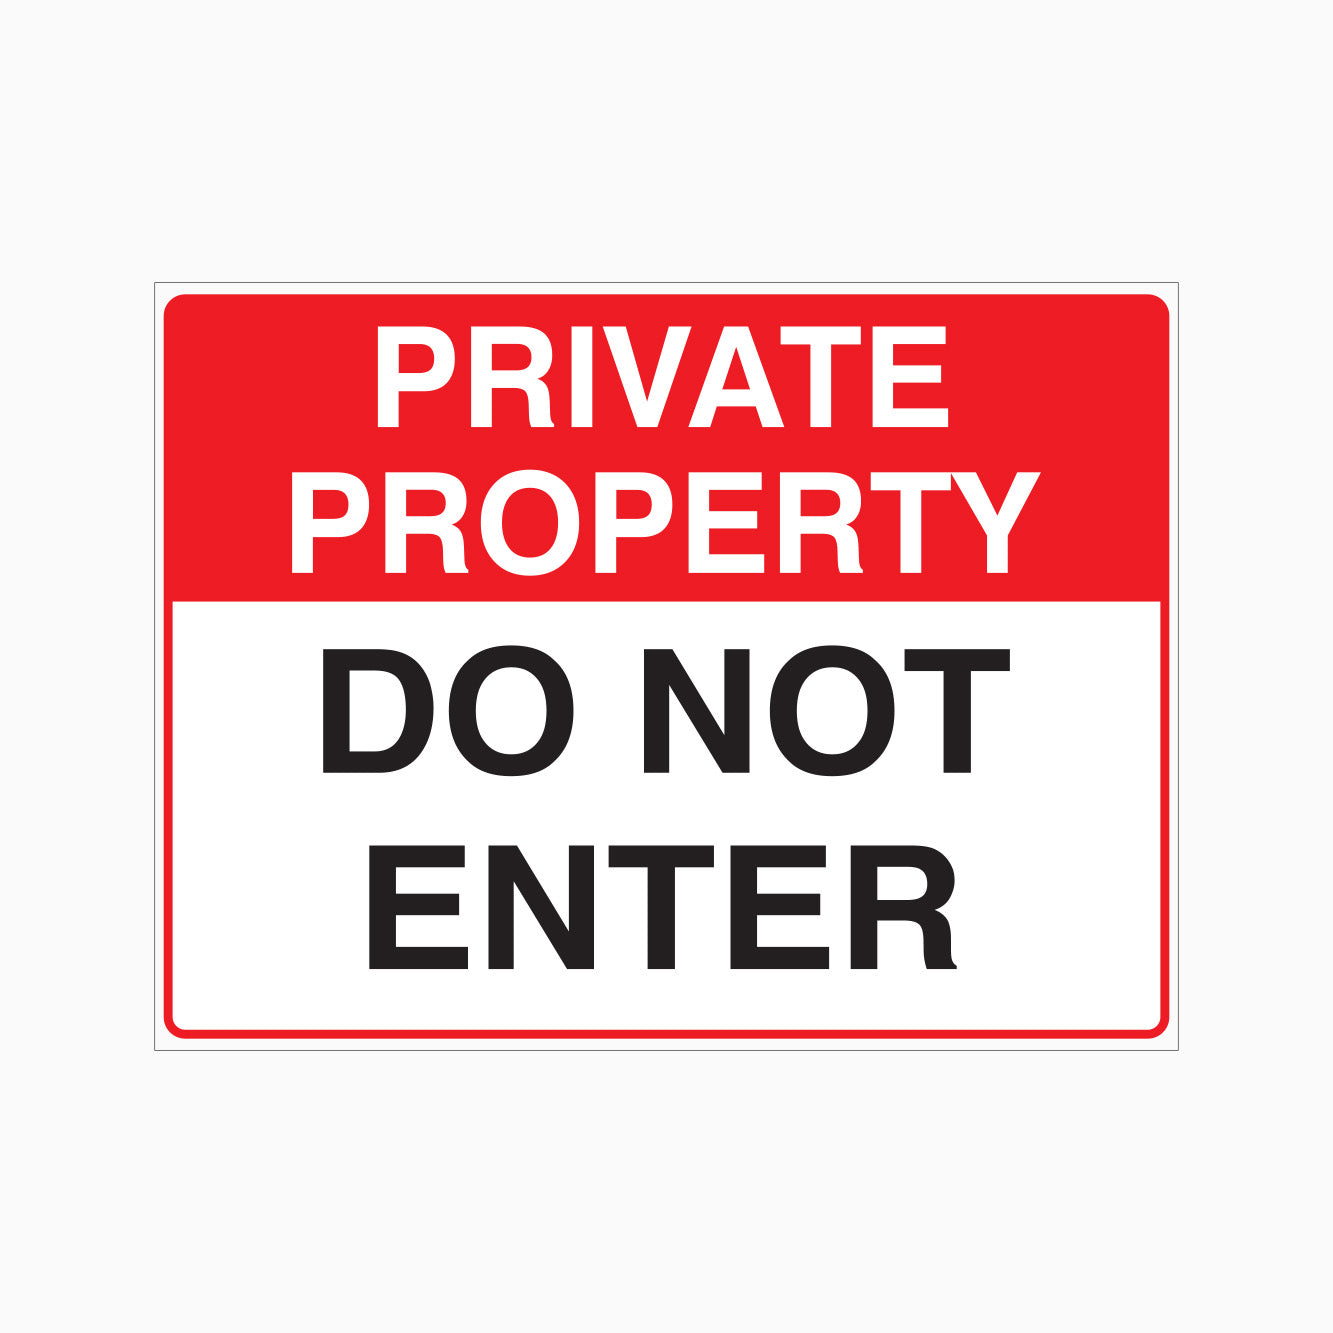 PRIVATE PROPERTY SIGN - DO NOT ENTER SIGN